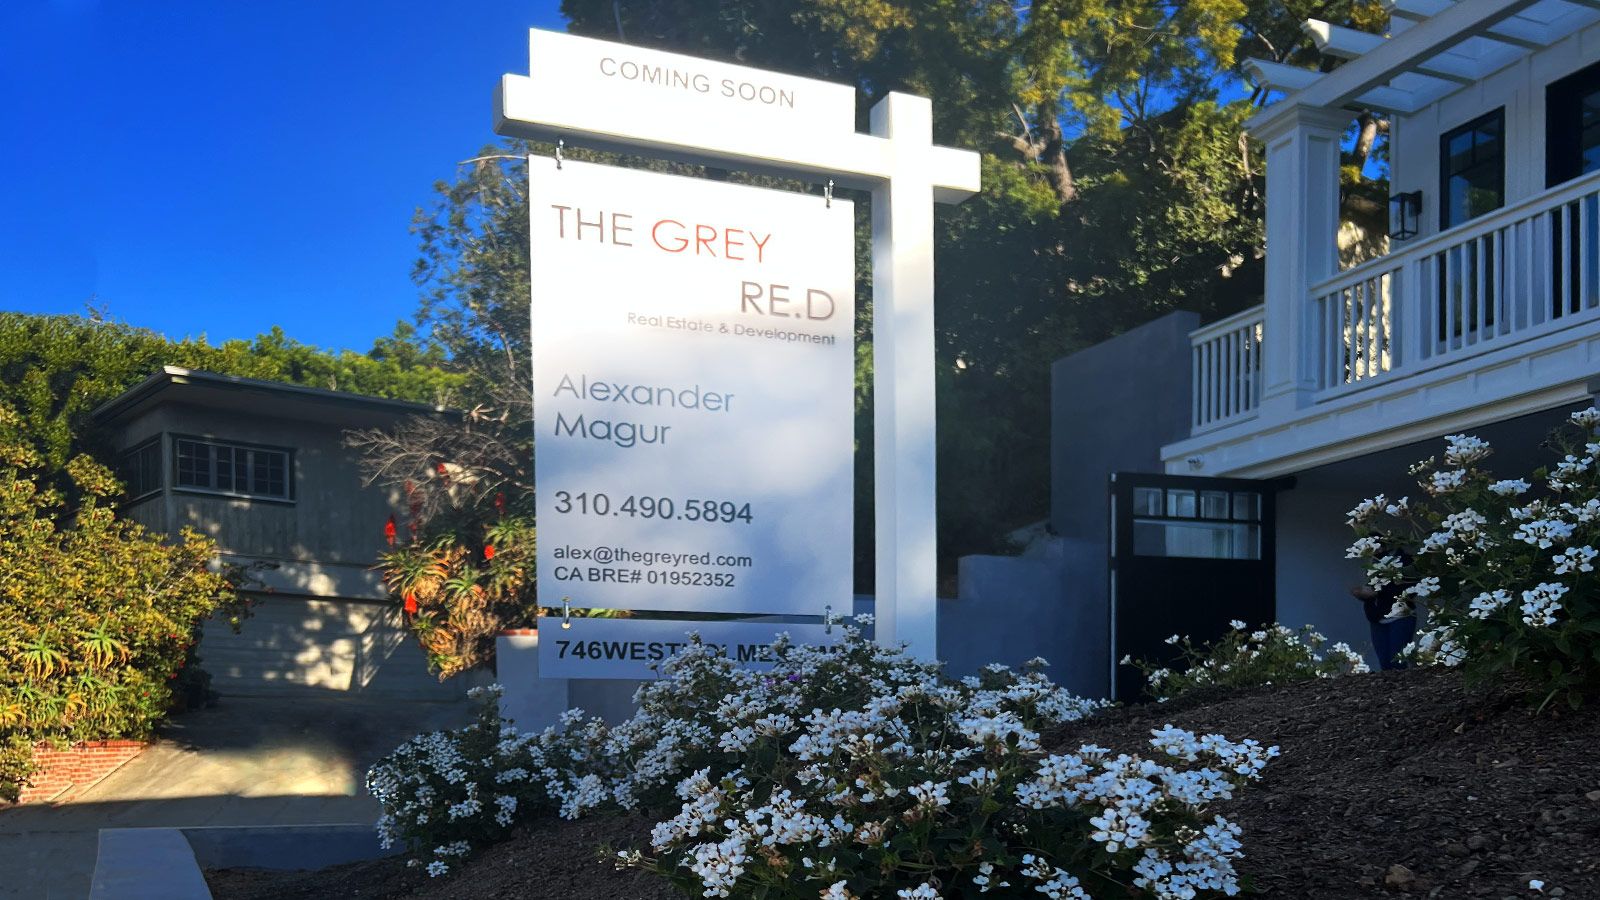 The grey real estate sign